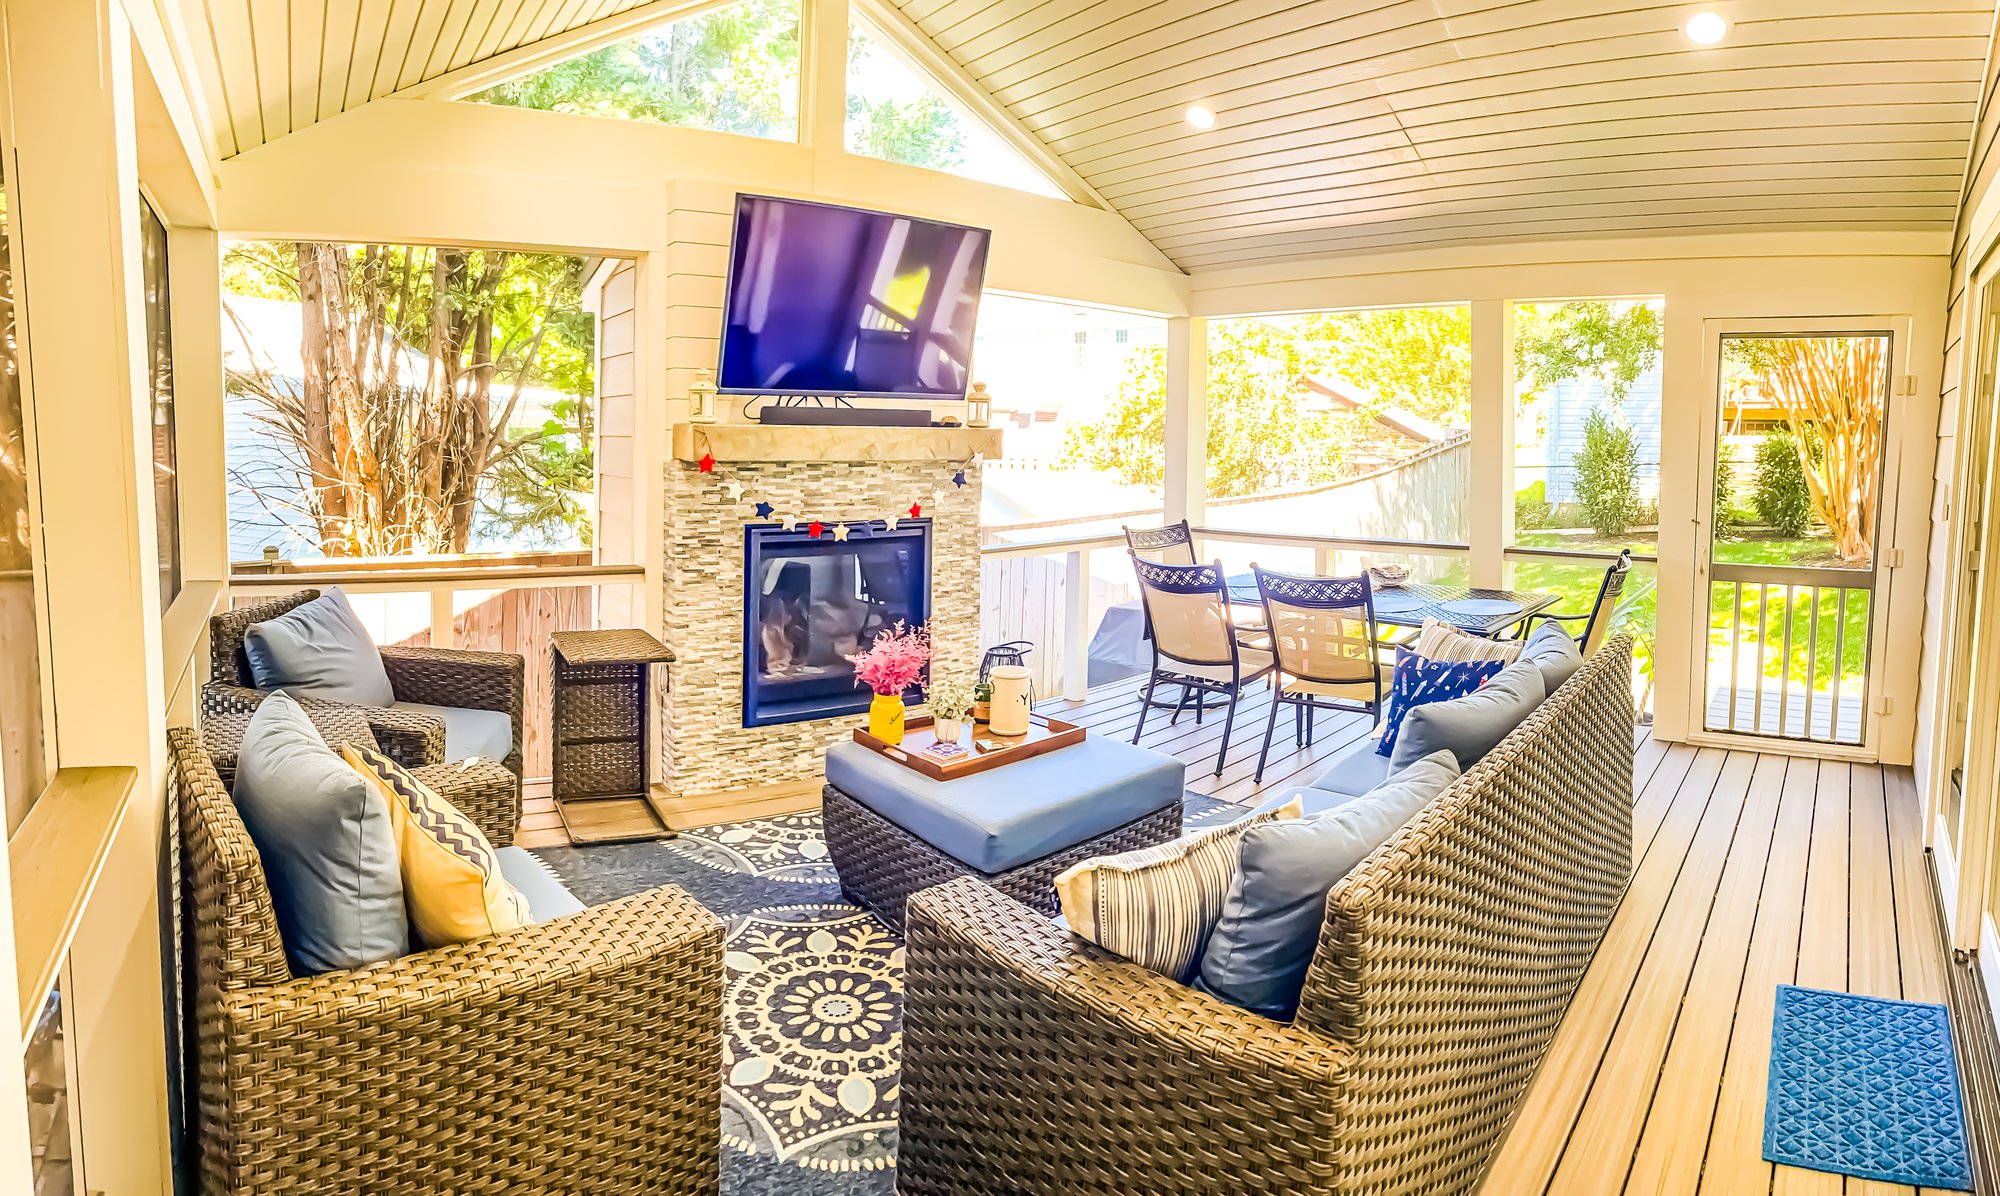 Screened in deck with couches and a television over a fire place.